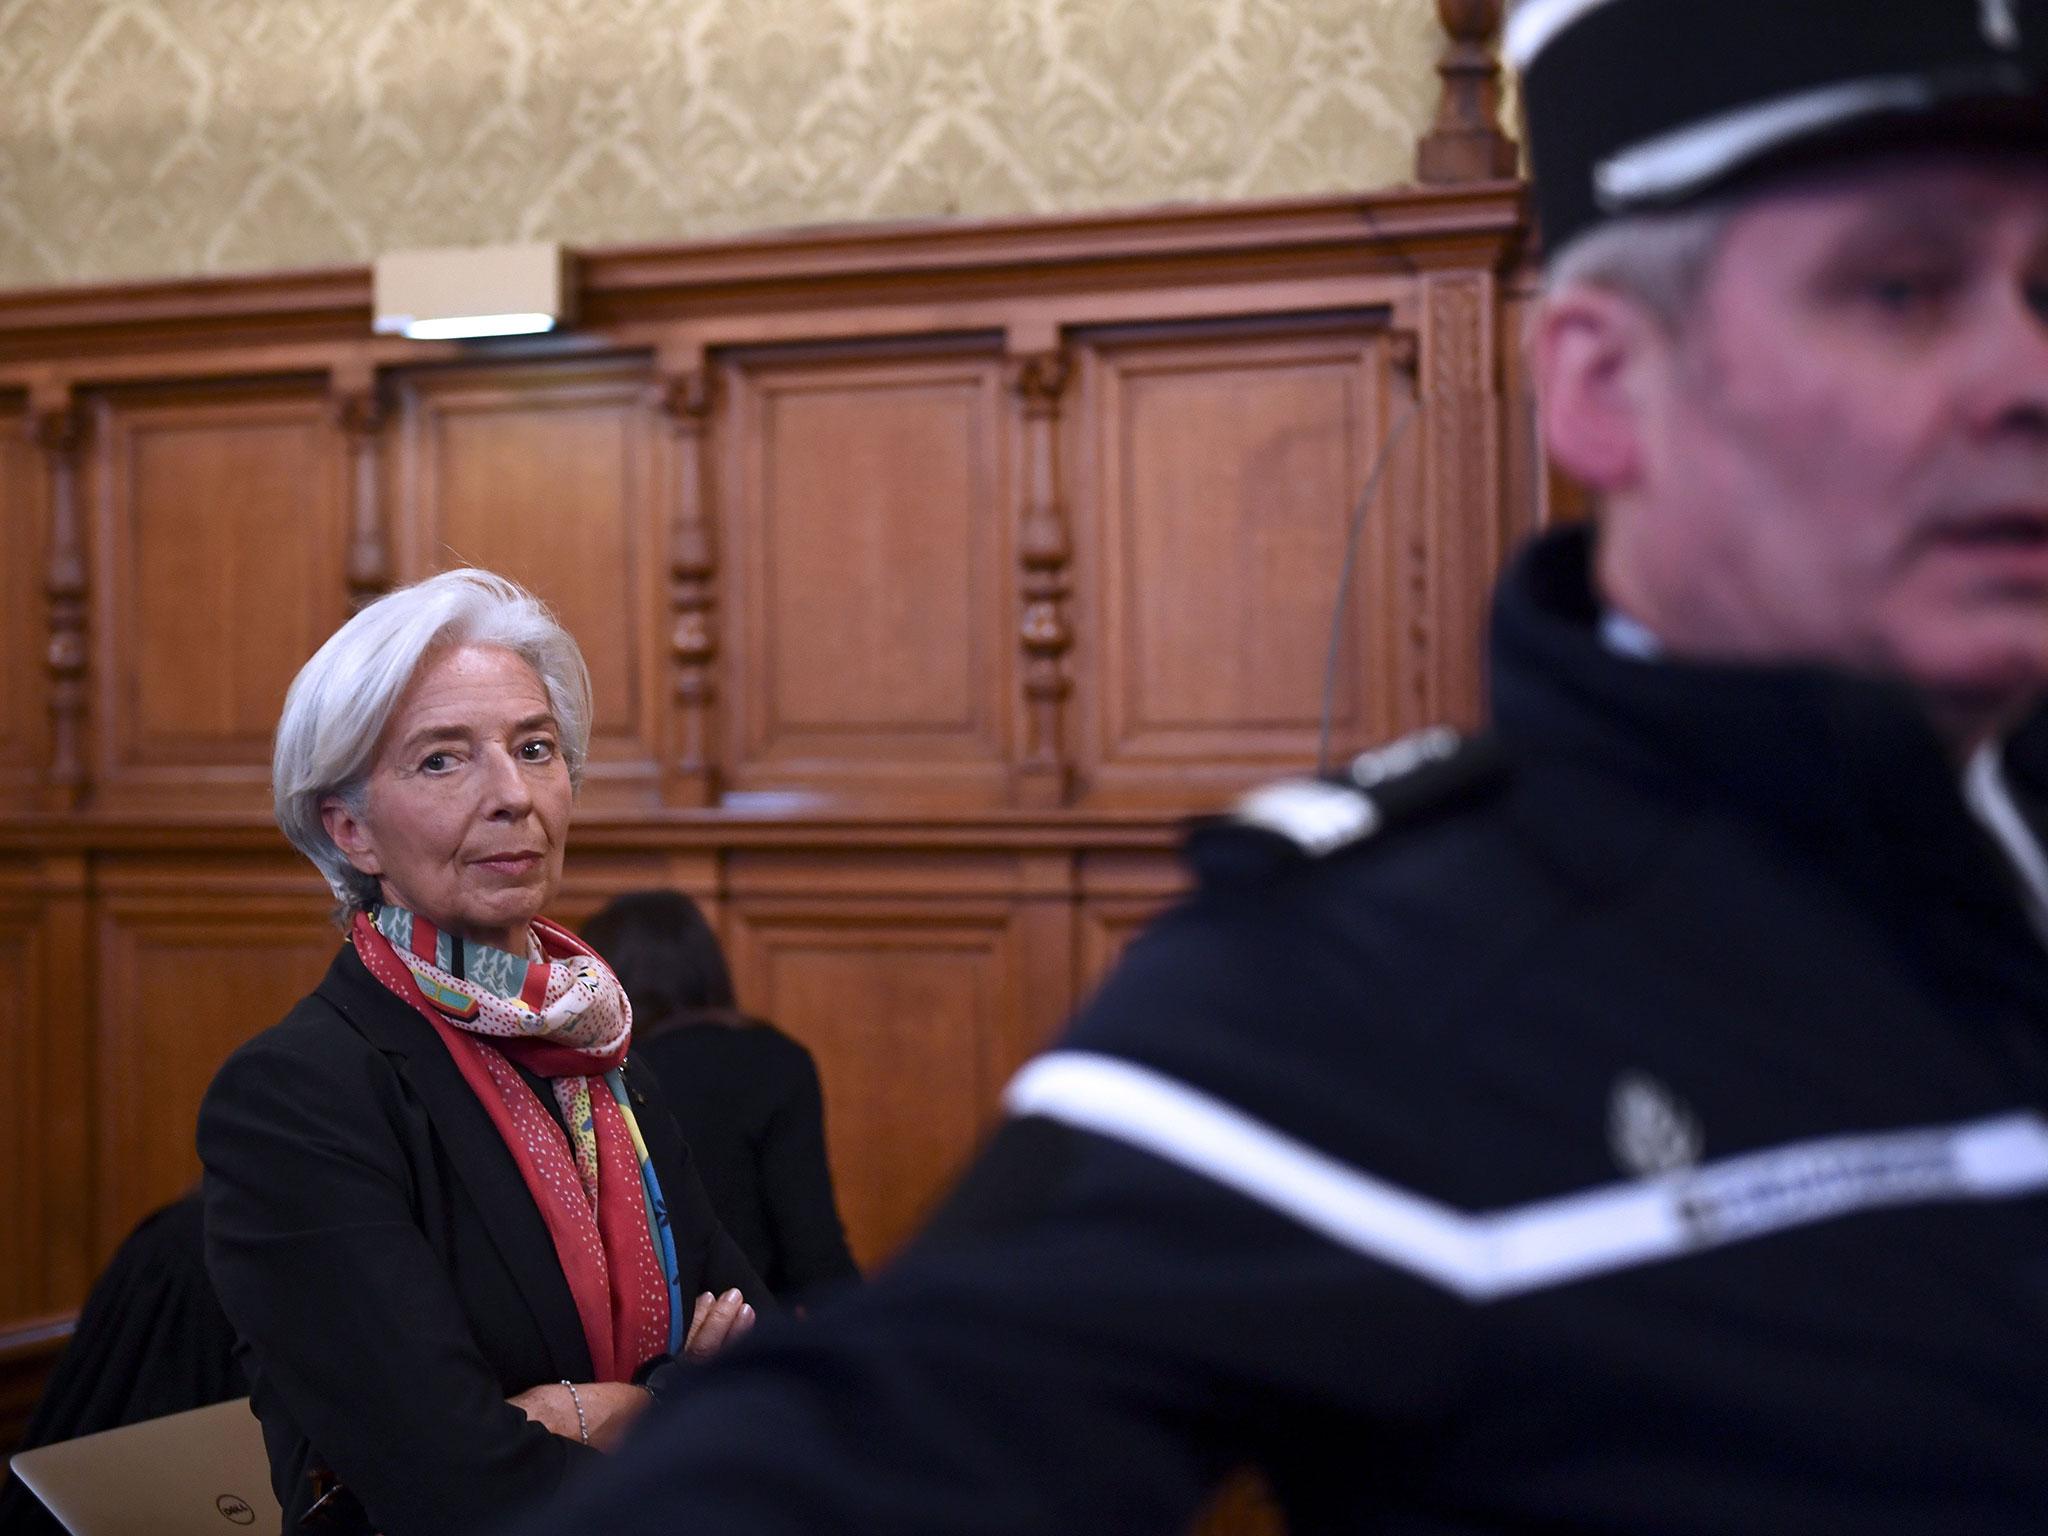 IMF chief Christine Lagarde protested her innocence through tears on Friday